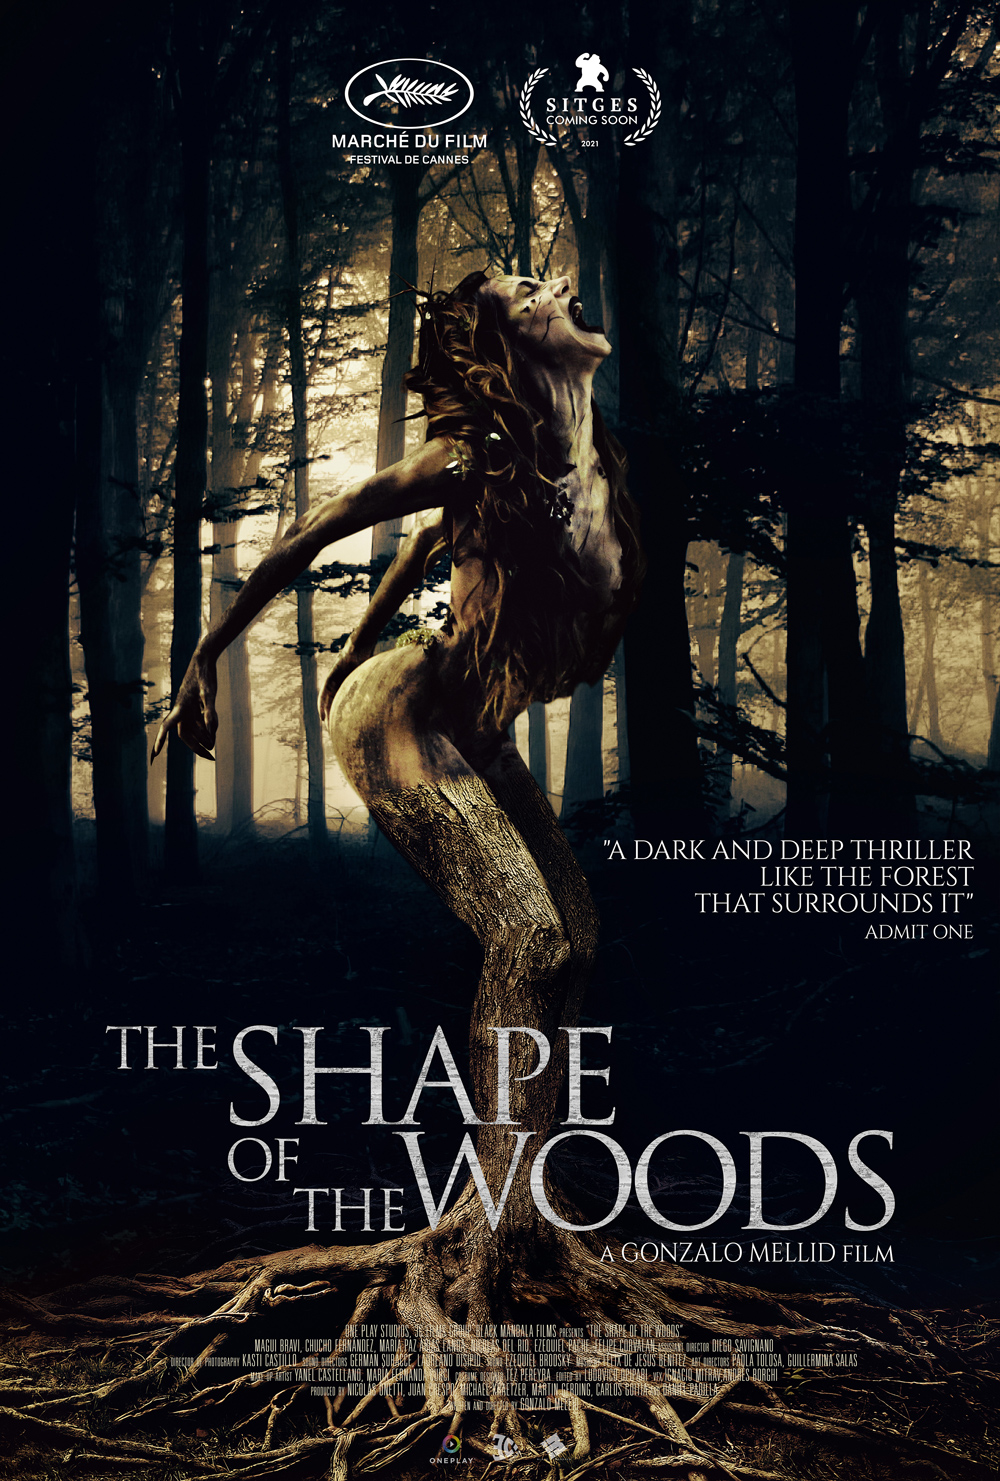 THE SHAPE OF THE WOODS